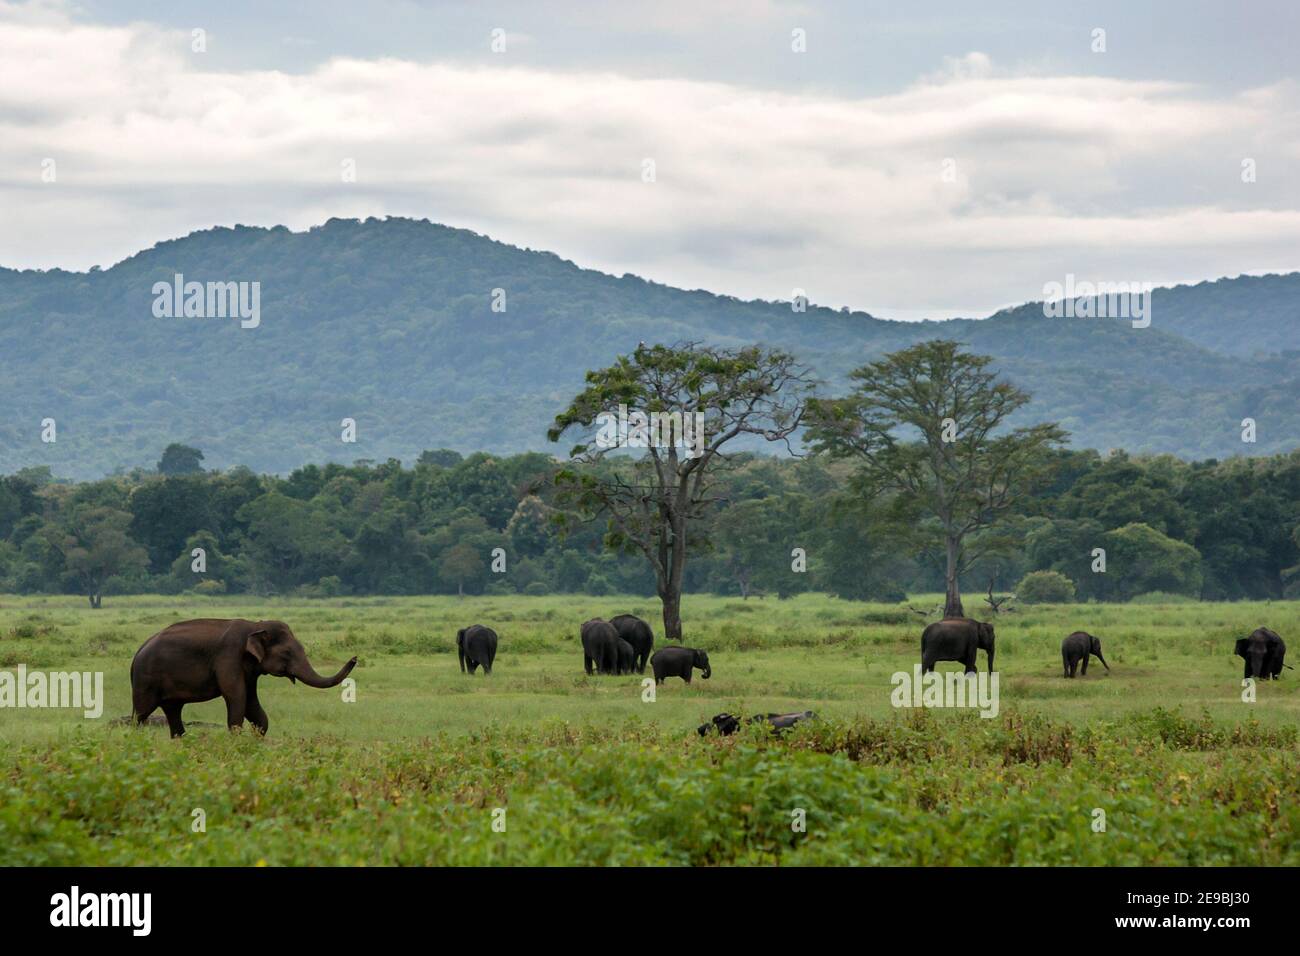 Elephants graze in Kaudulla National Park near Habarana in central Sri Lanka as a storm closes in. At peak times there are around 250 wild elephants. Stock Photo